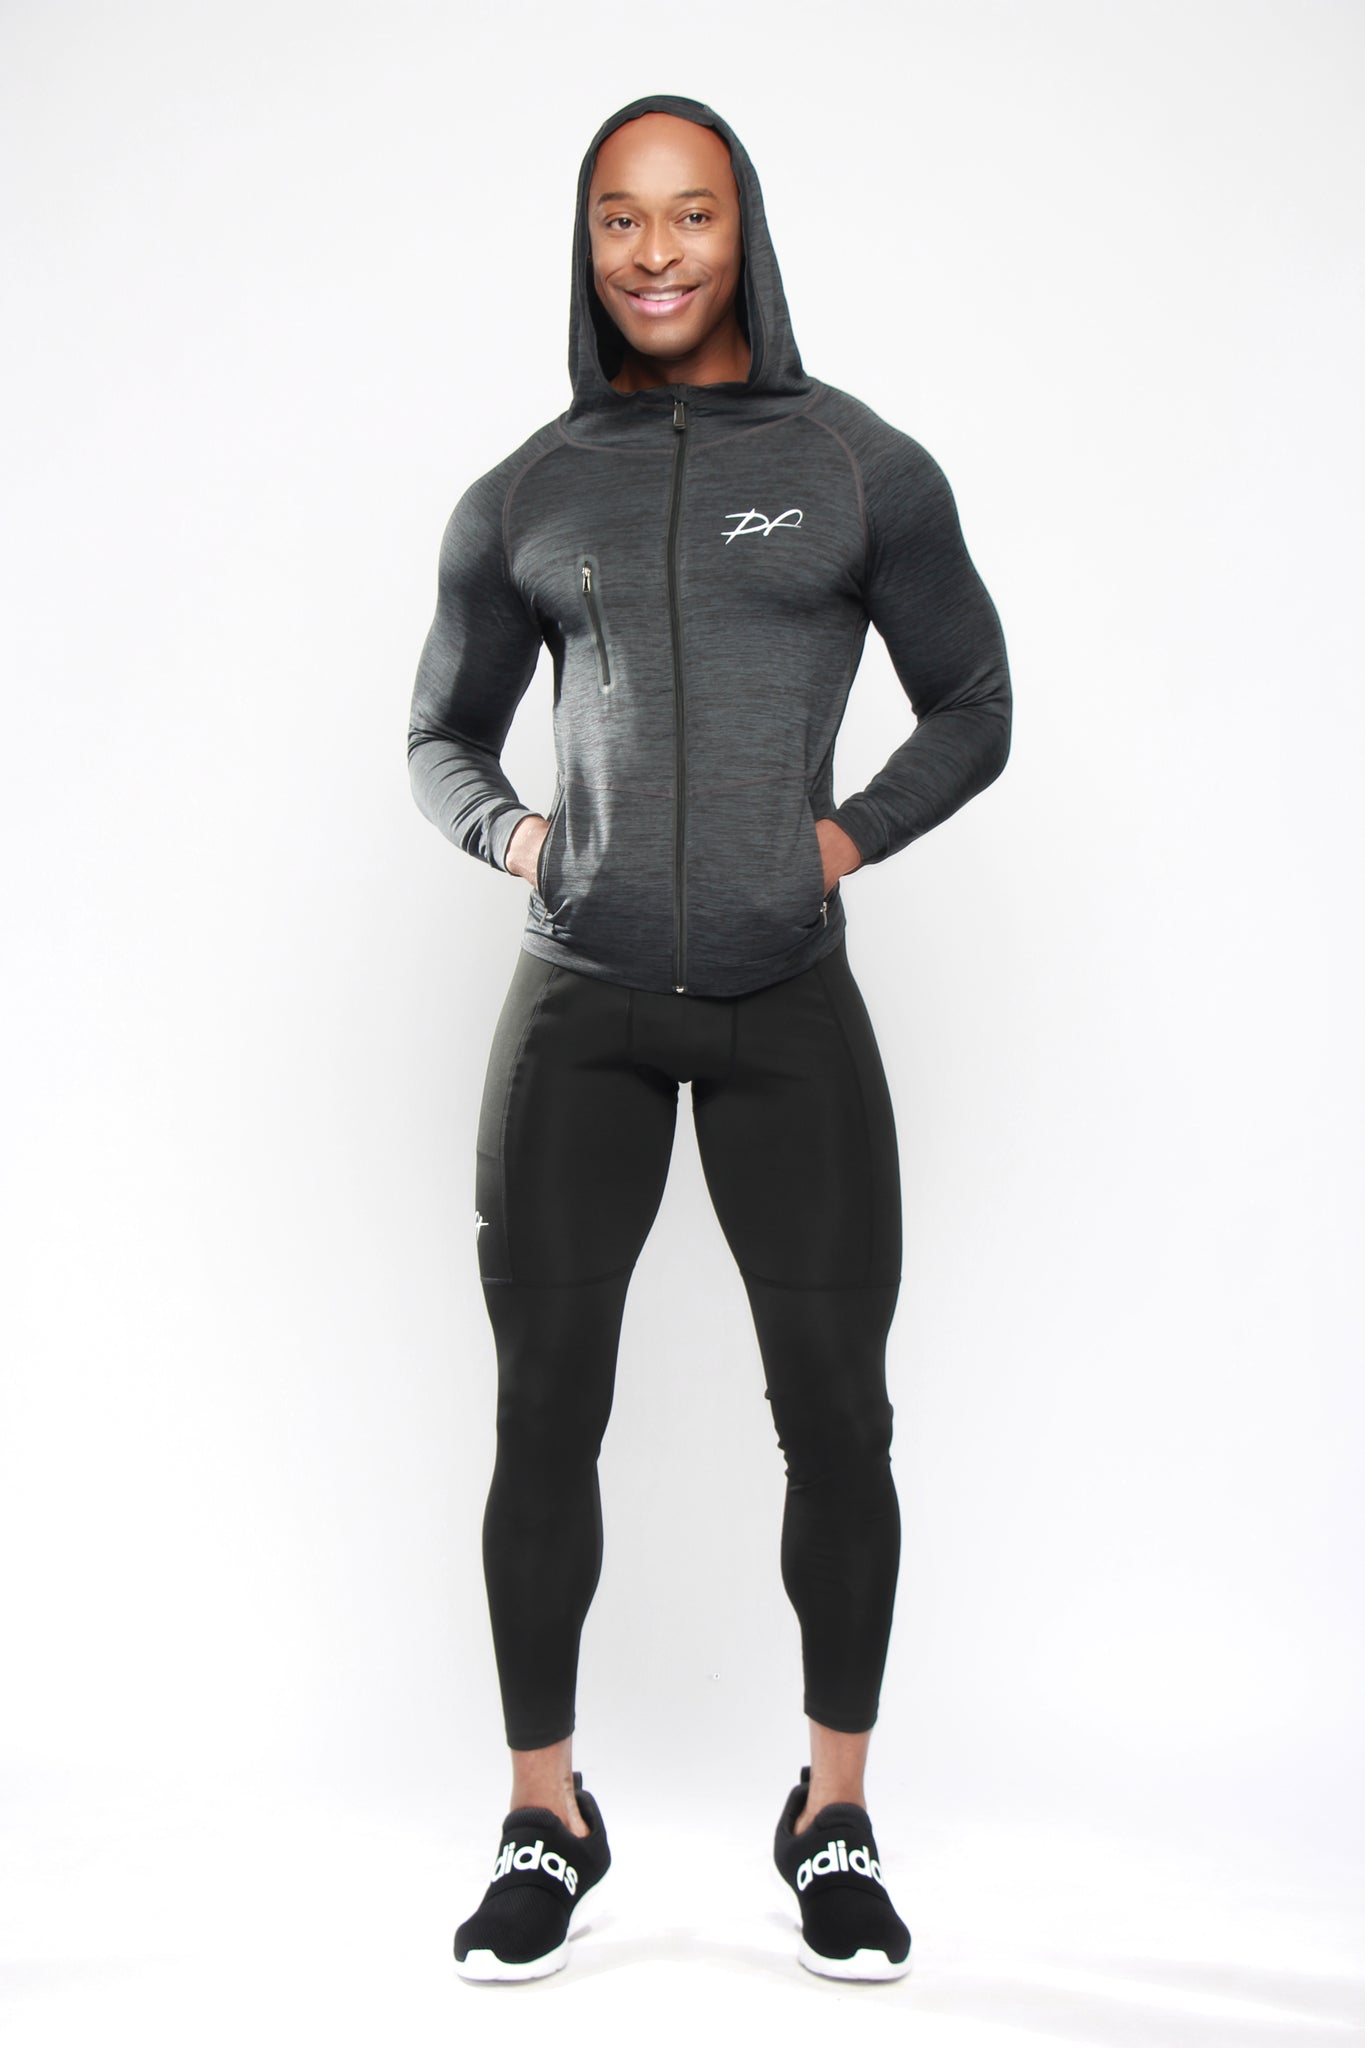 DRPfit for HIM Jackets and Hoodies